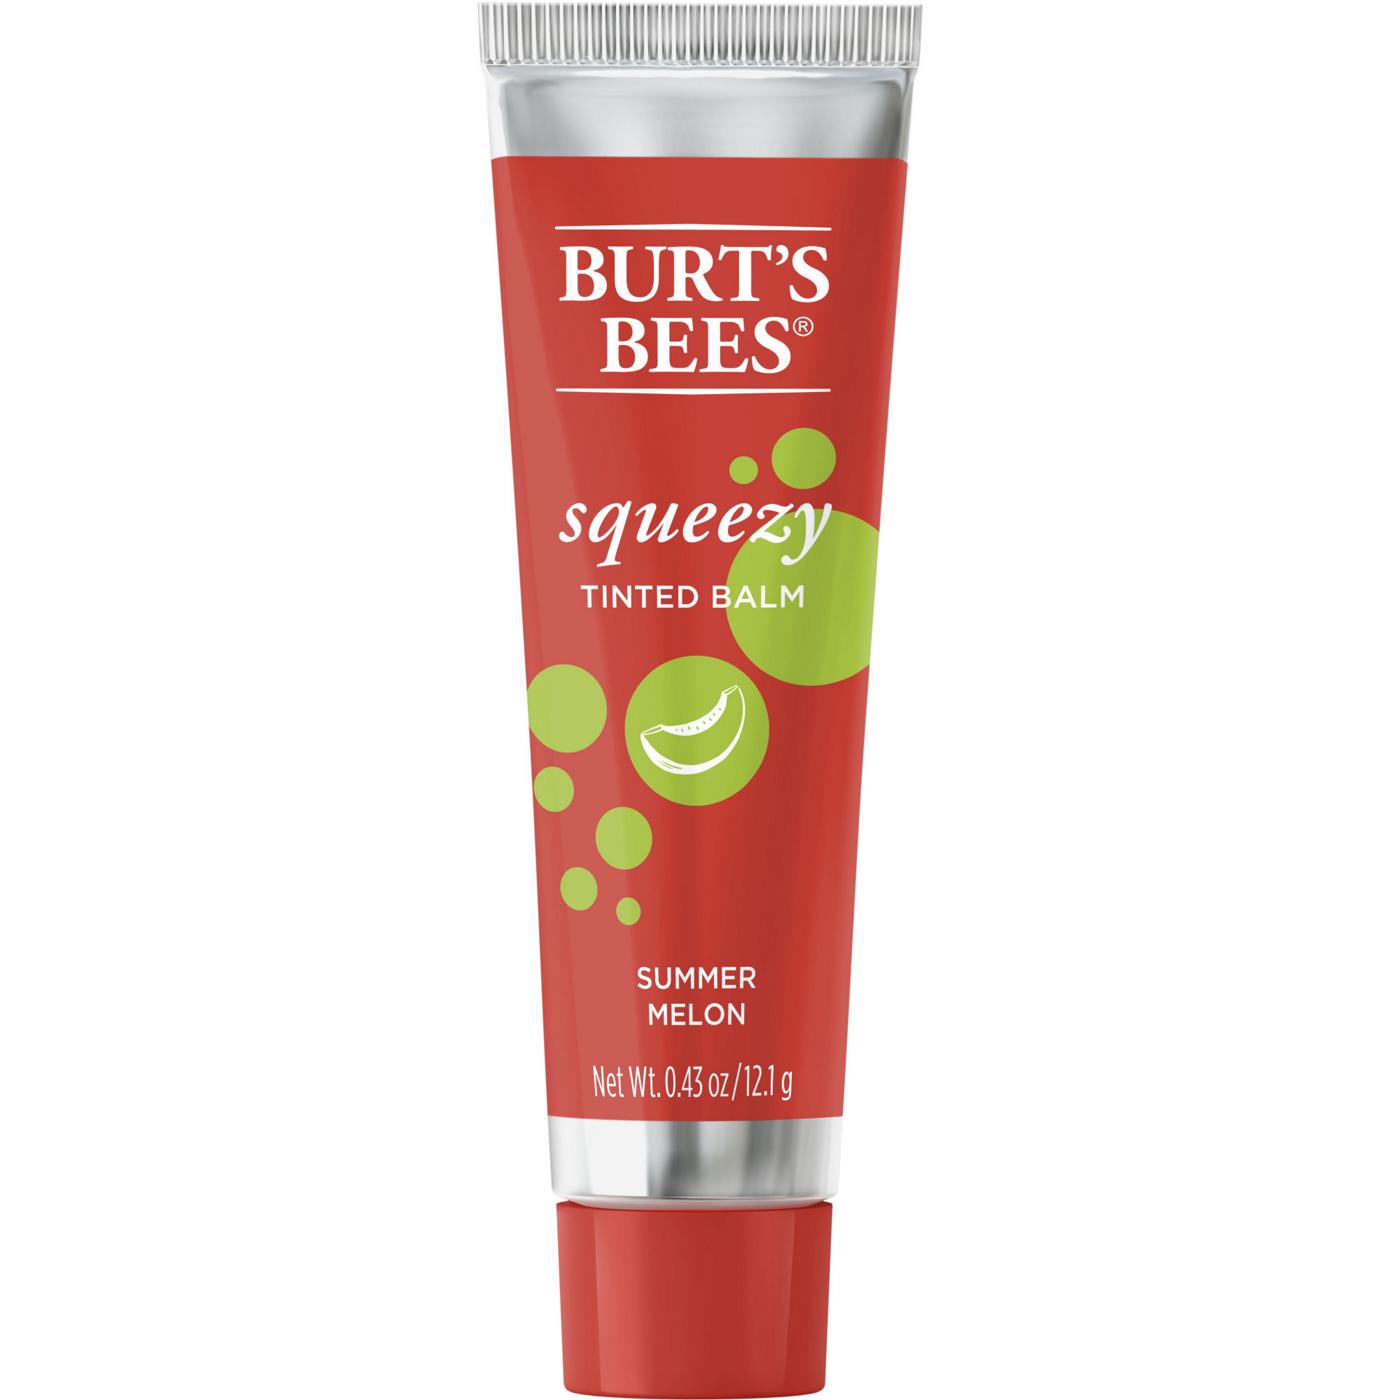 Burt's Bees Squeezy Tinted Balm - Summer Melon; image 1 of 10